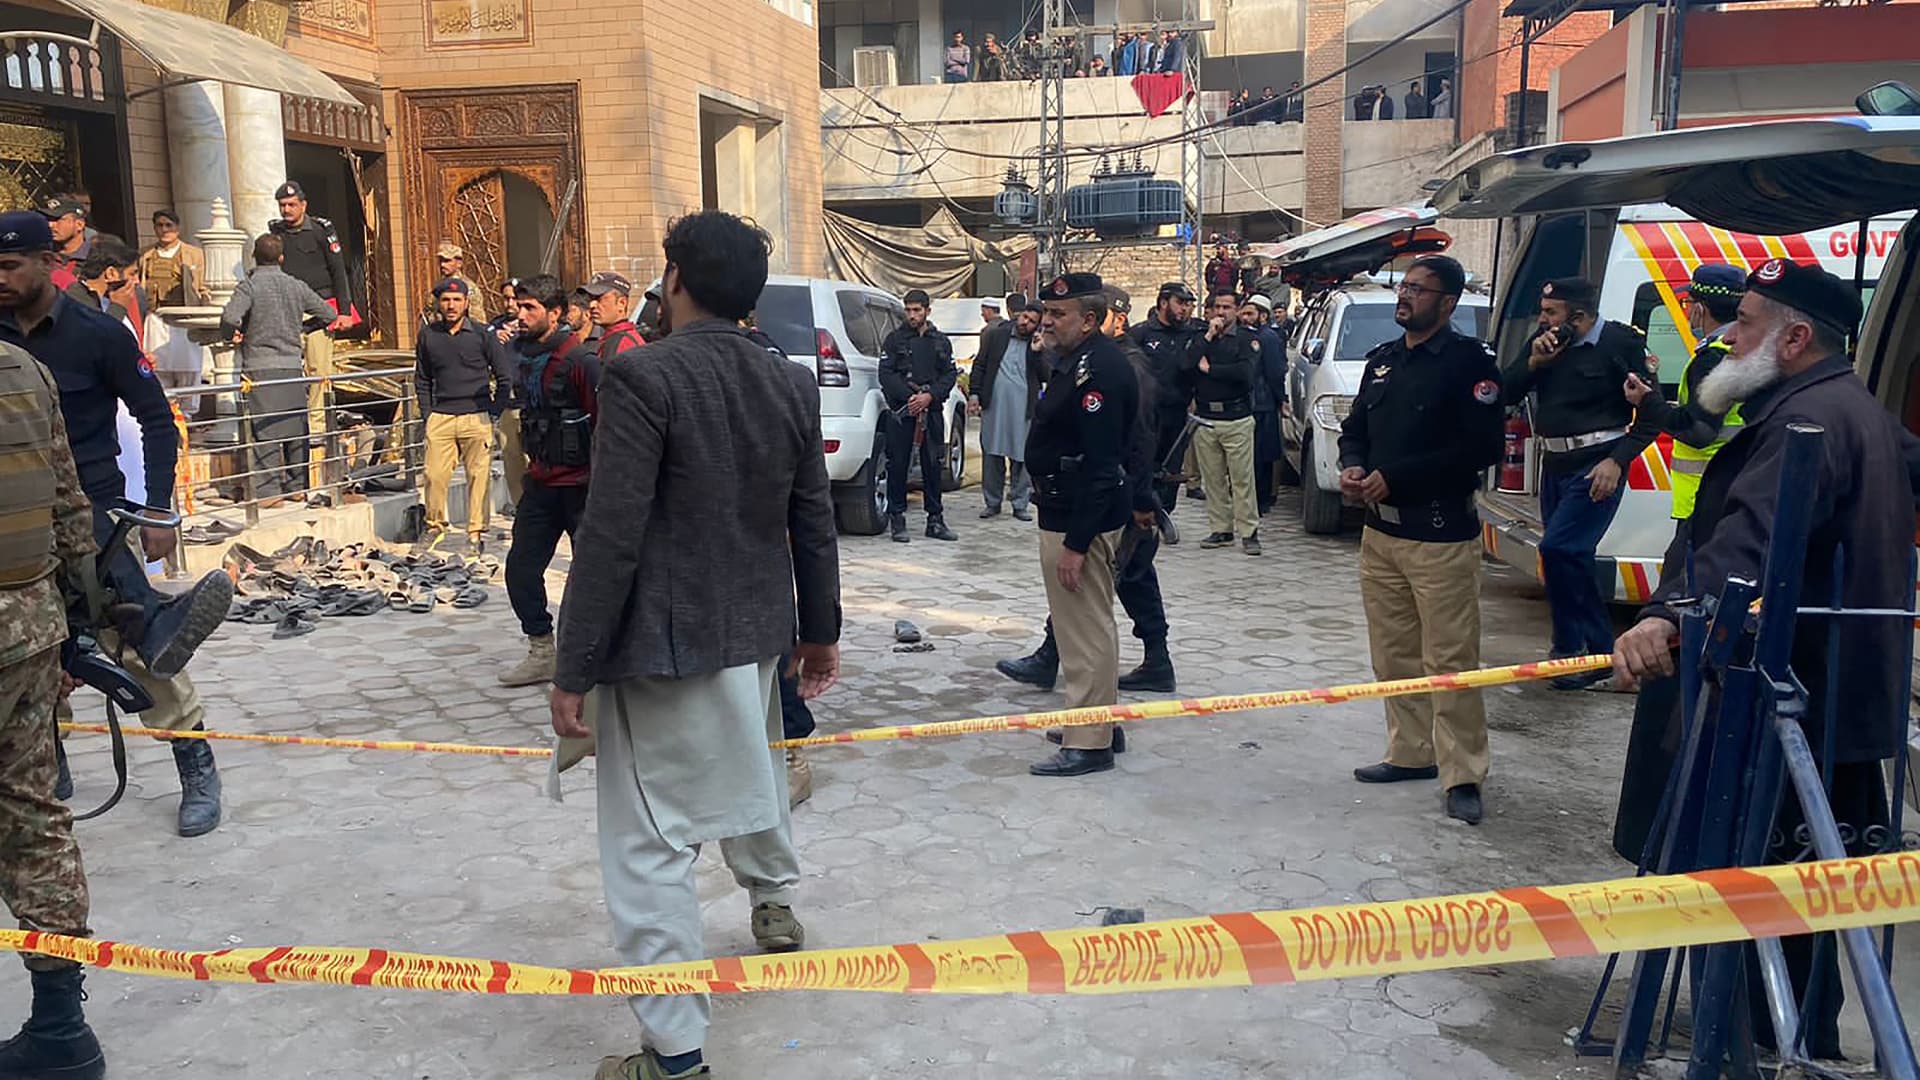 Security personnel cordon off the site of a mosque blast inside the police headquarters in Peshawar on January 30, 2023. - At least 25 people were killed and 120 were injured in a mosque blast at a police headquarters in Pakistan on January 30, a local government official said. (Photo by Maaz ALI / AFP) (Photo by MAAZ ALI/AFP via Getty Images)